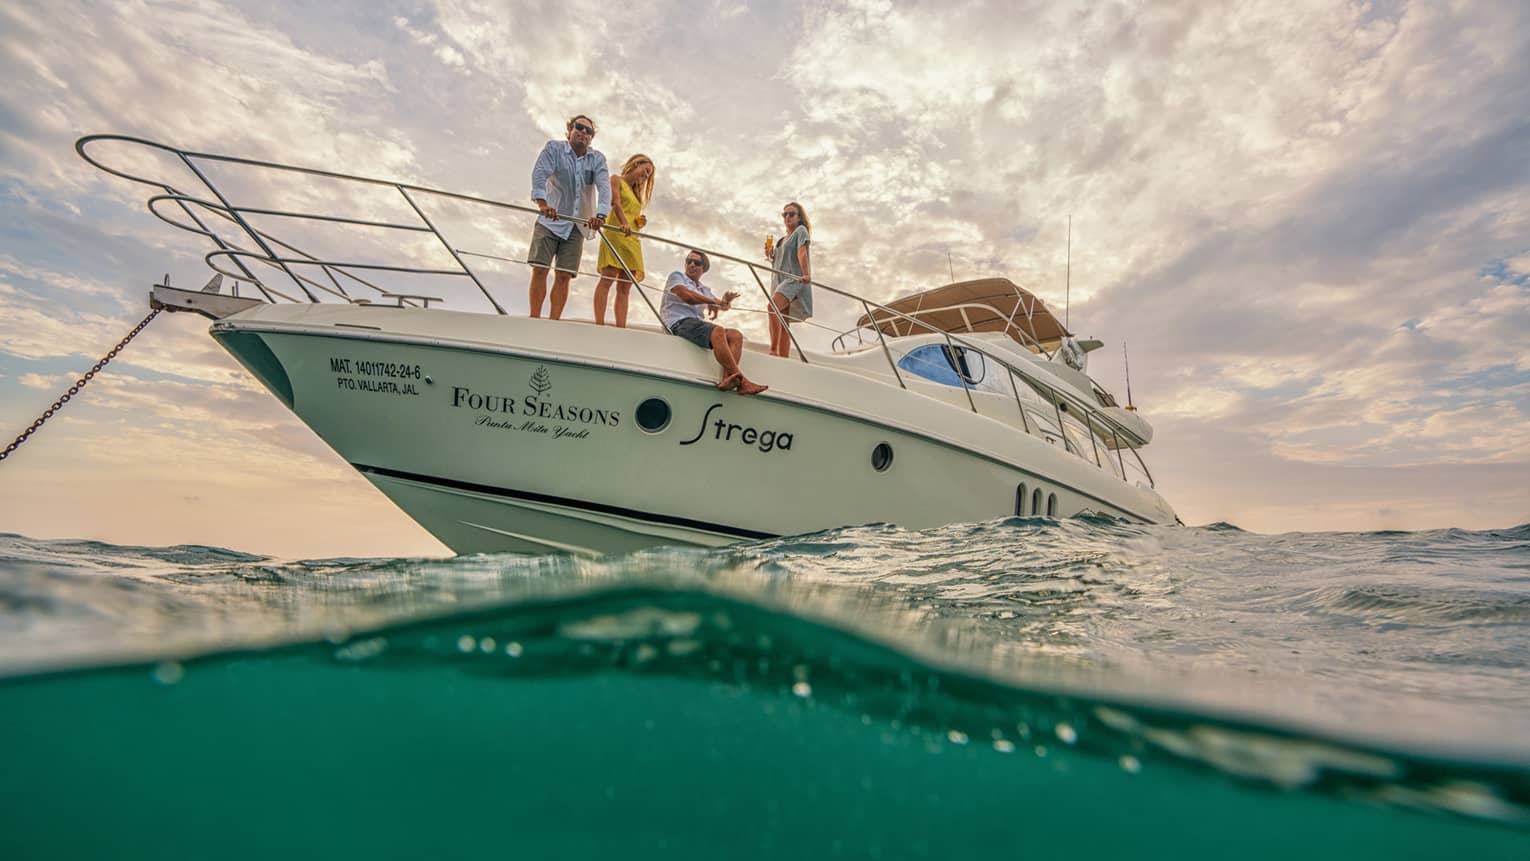 White Four Seasons motor yacht anchored in ocean, two men and two women look out at sea